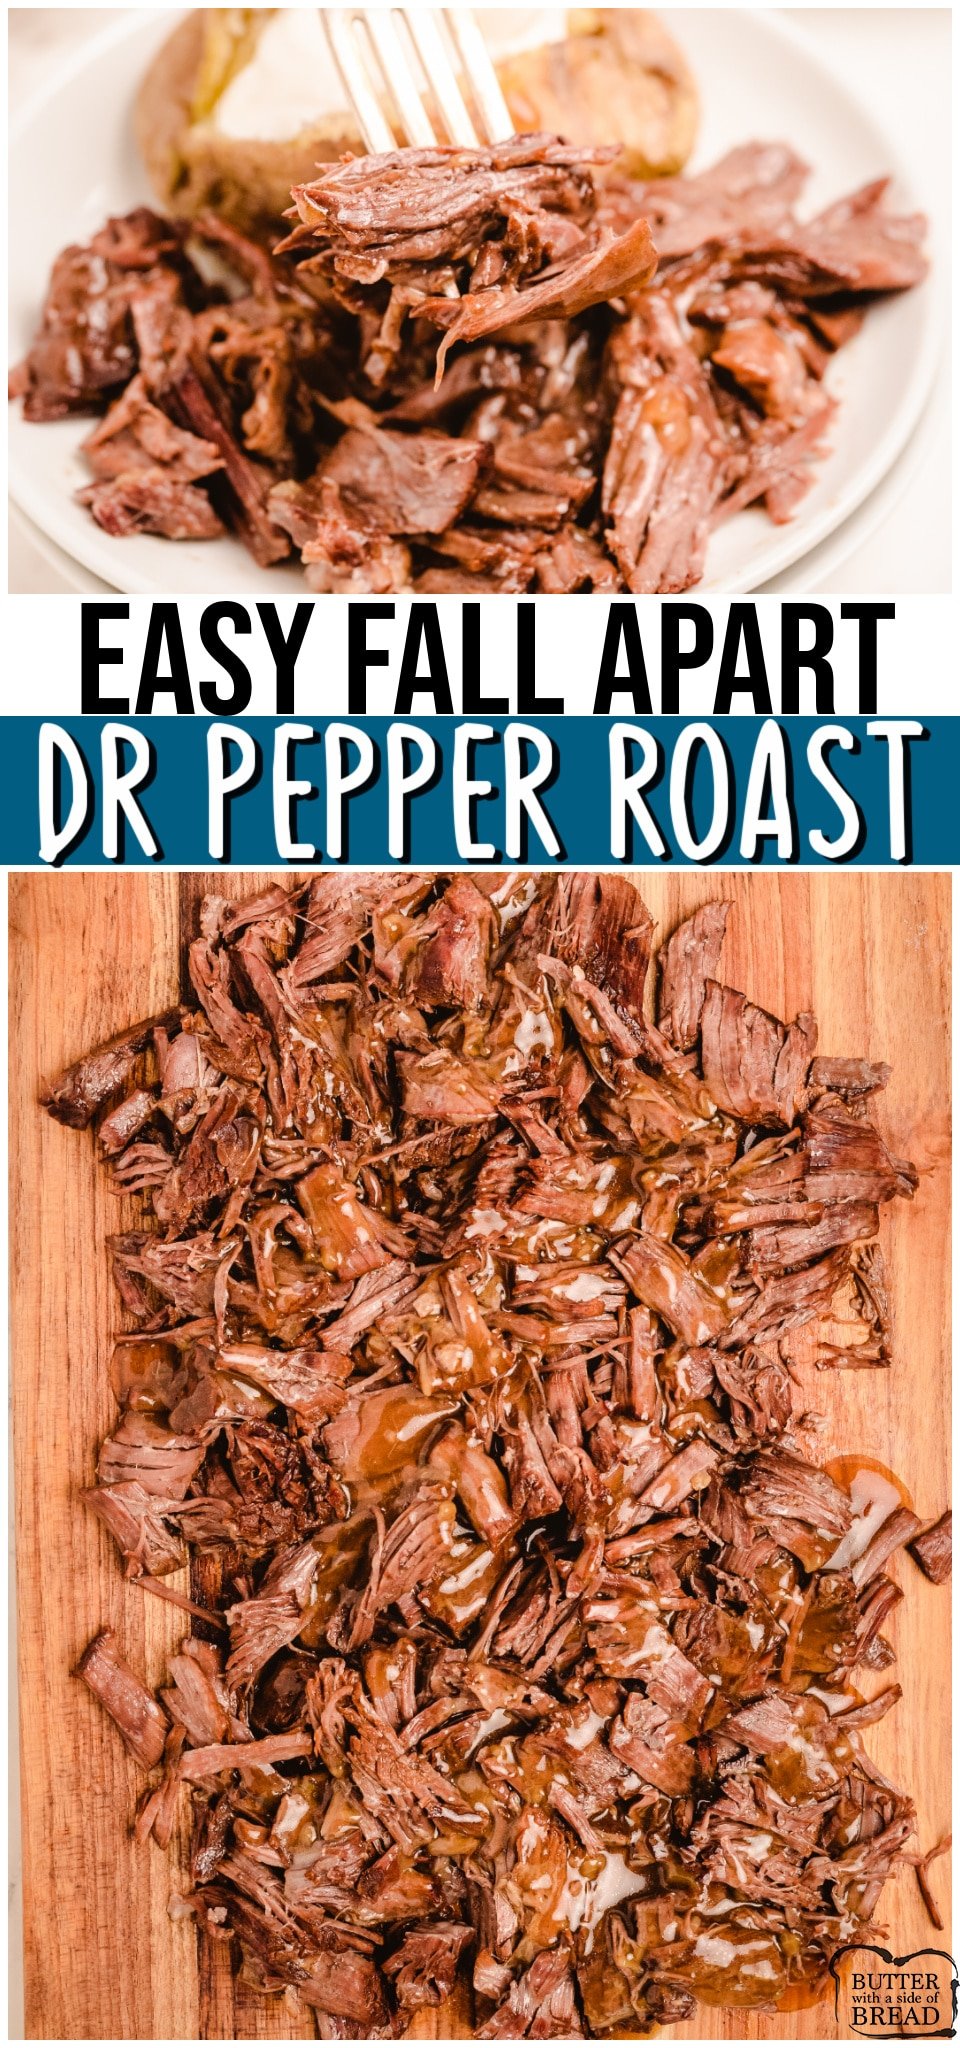 Slow Cooker Dr. Pepper Roast is an easy to make, tender roast made with just 5 ingredients. Packed full of flavor, this crockpot roast recipe is perfect for any Dr. Pepper lover. #beef #roast #fallapart #DrPepper #dinner #easyrecipe from BUTTER WITH A SIDE OF BREAD